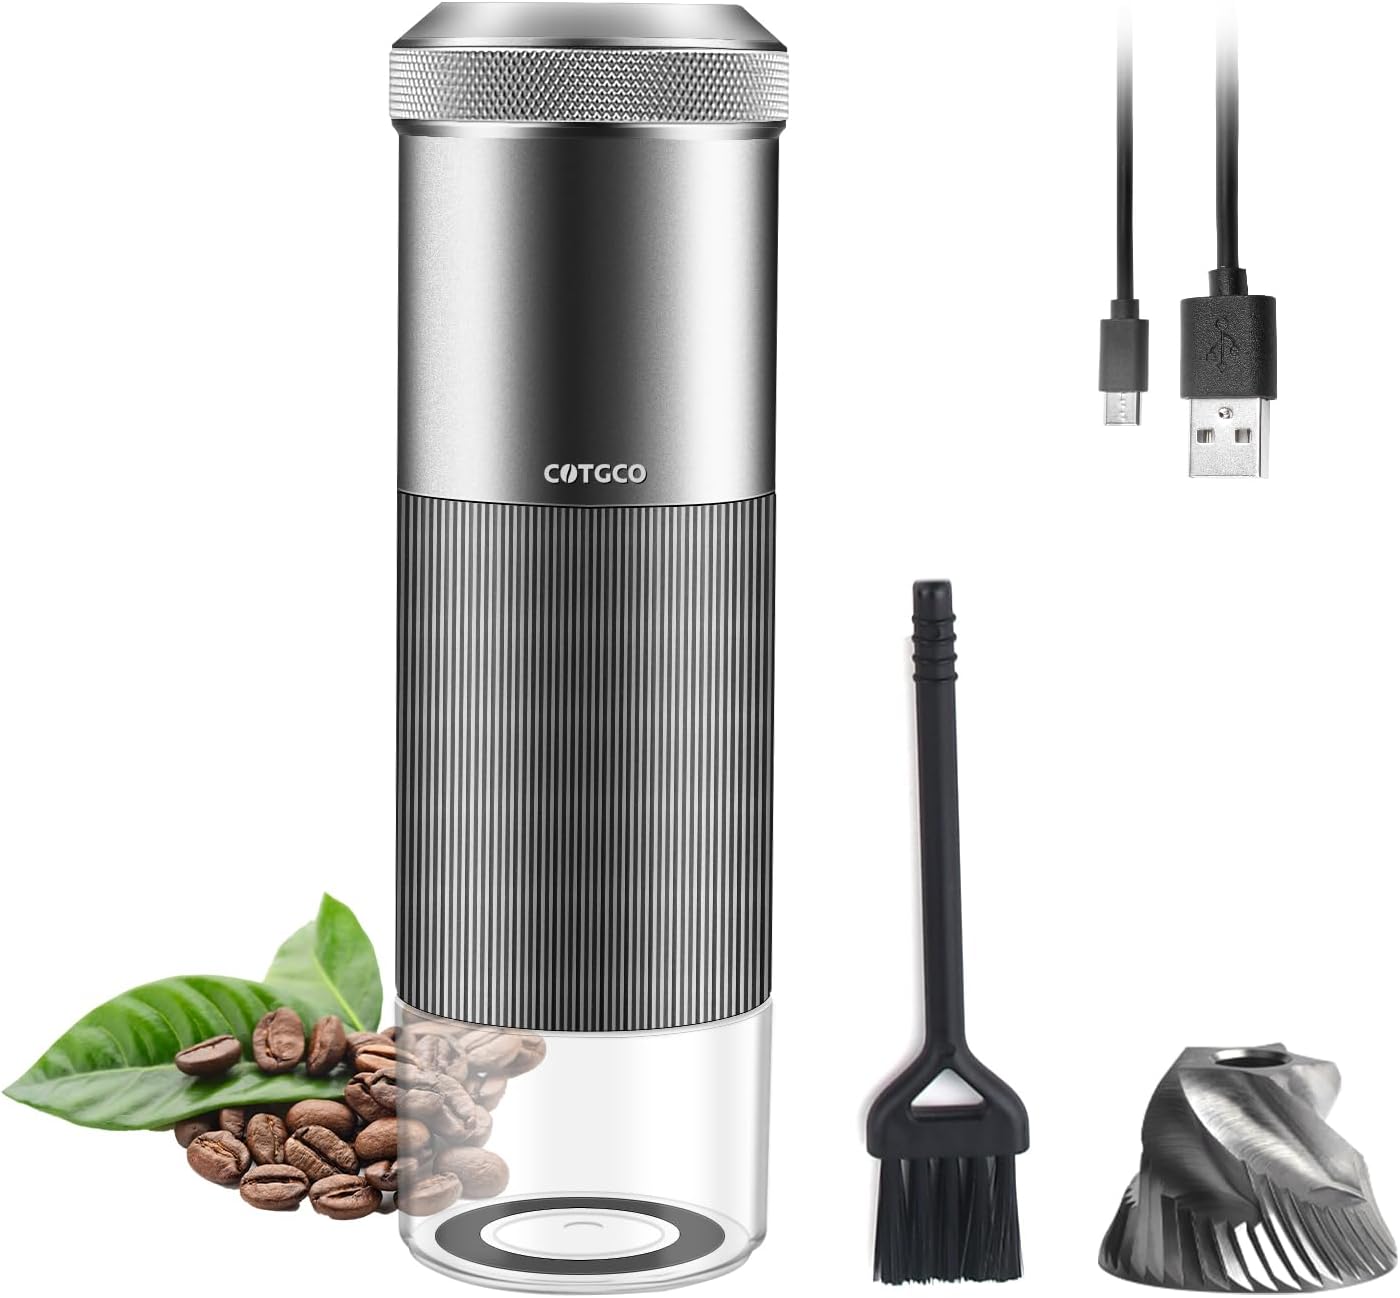 Coffee Grinder Electric Espresso Grinder Small: COTGCO Portable Coffee Bean Mill with Stainless Steel Cone Grinder USB 1600 mAh Battery for 15 to 20 Applications Mini for Travel